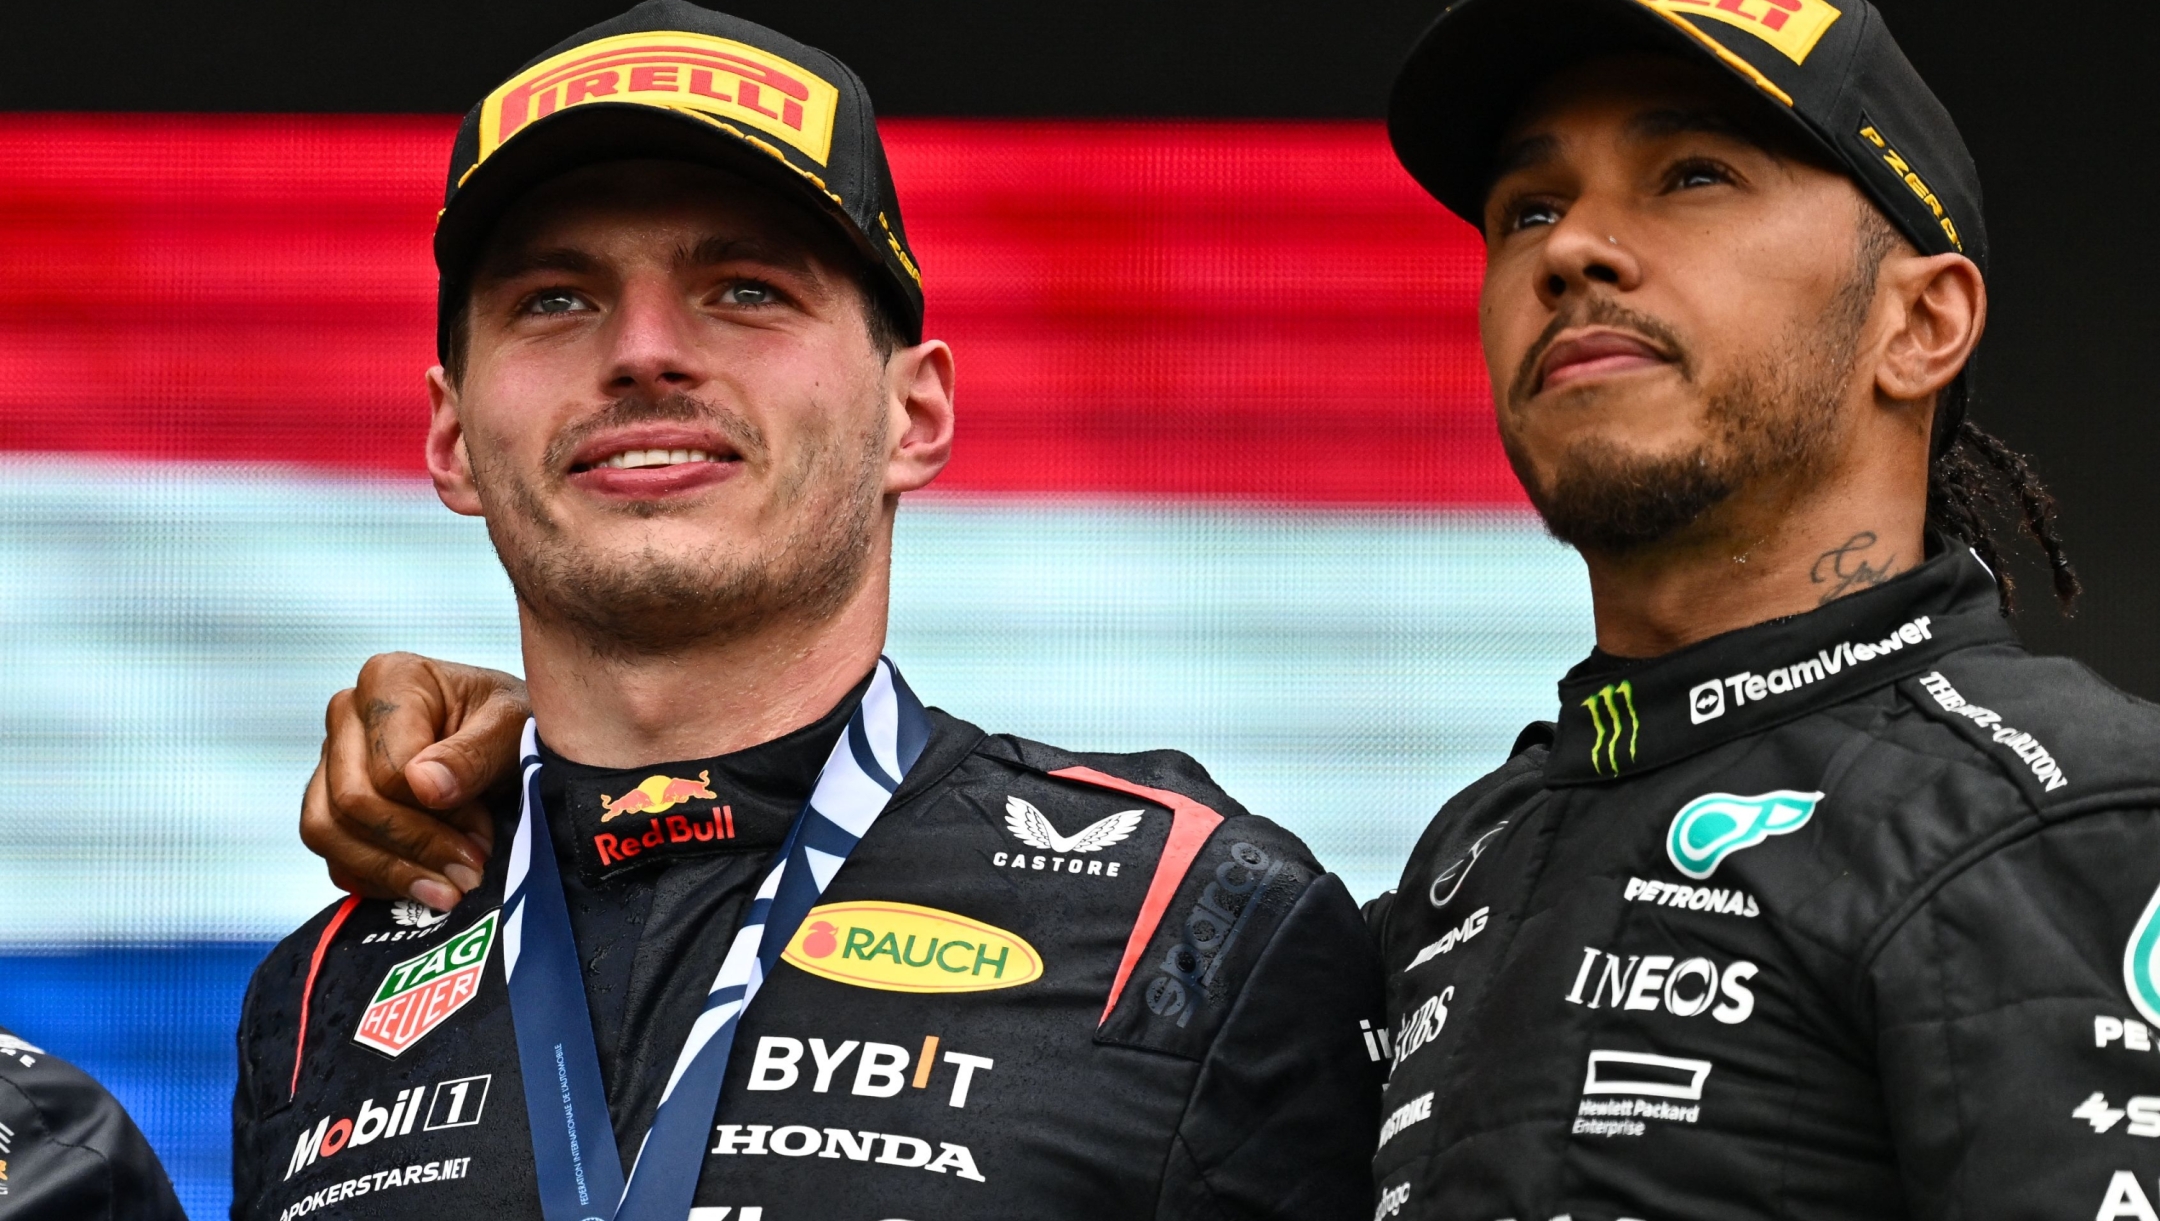 MONTREAL, QUEBEC - JUNE 18: Race winner Max Verstappen of the Netherlands and Oracle Red Bull Racing and Third placed Lewis Hamilton of Great Britain and Mercedes celebrate on the podium during the F1 Grand Prix of Canada at Circuit Gilles Villeneuve on June 18, 2023 in Montreal, Quebec.   Minas Panagiotakis/Getty Images/AFP (Photo by Minas Panagiotakis / GETTY IMAGES NORTH AMERICA / Getty Images via AFP)